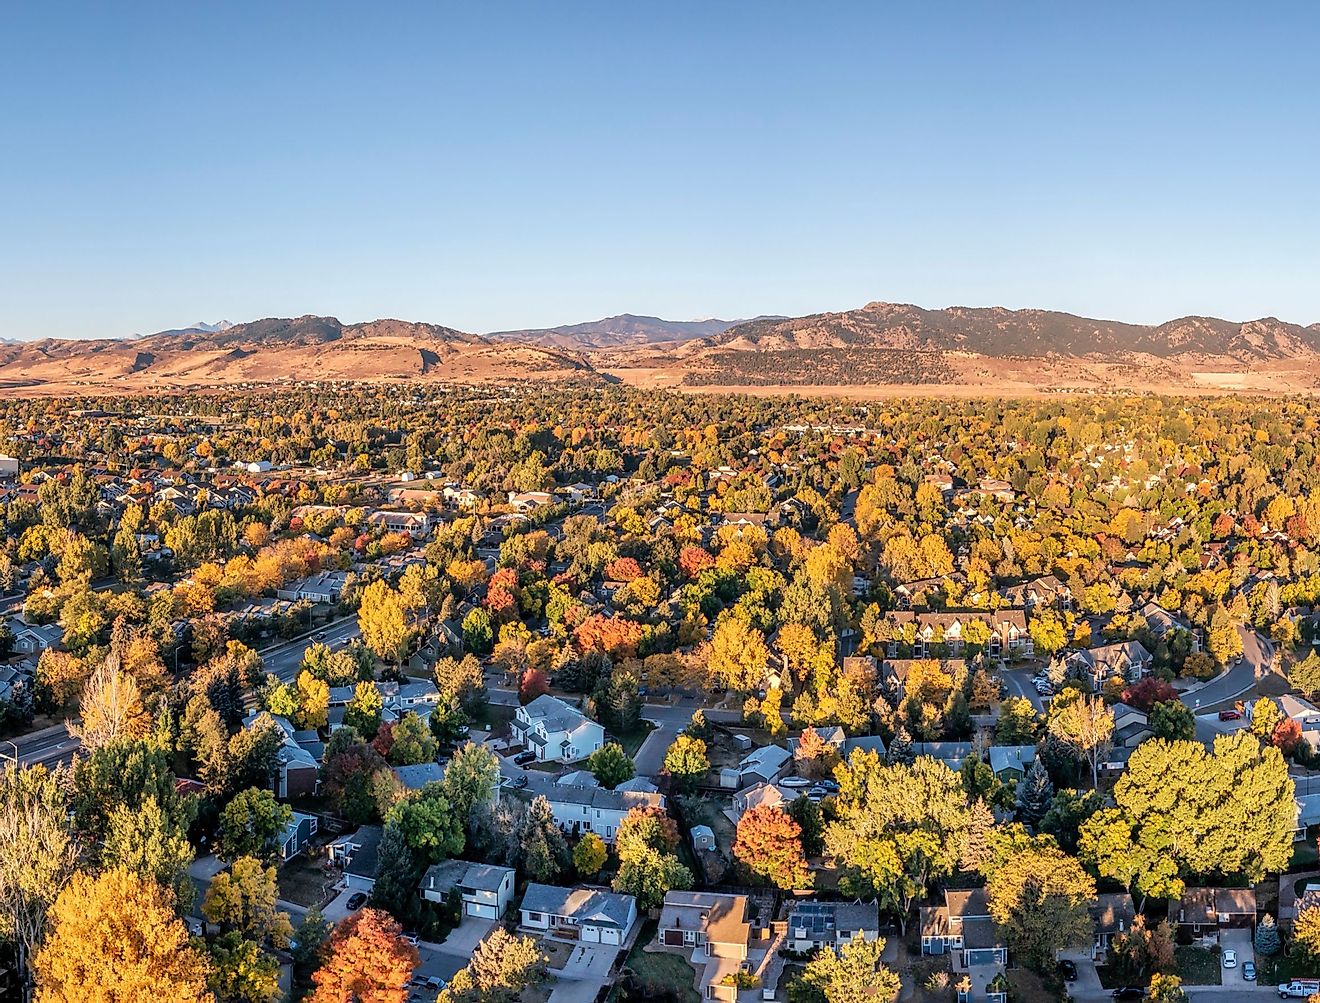 Fort Collins and Front Range of Rocky Mountains in northern Colorado. Image credit marekuliasz via Shutterstock